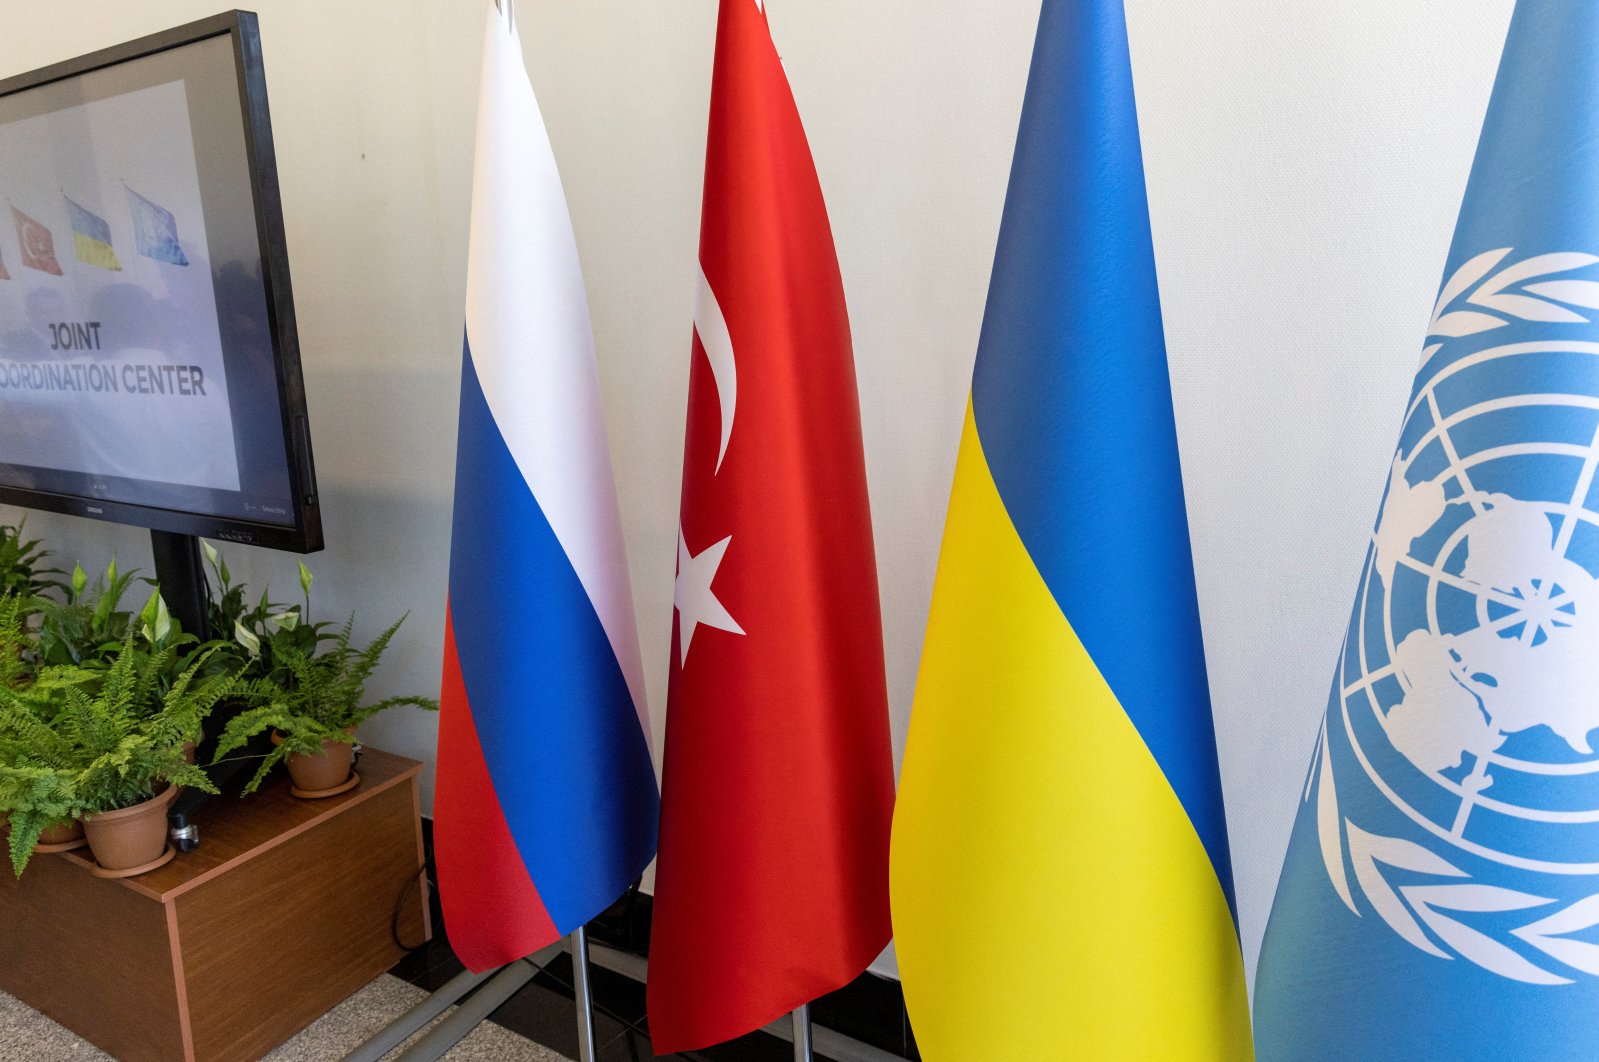 The flags of Russia, Ukraine, Turkey and the United Nations are seen during the opening ceremony of a joint coordination center (JCC) that will oversee a U.N.-brokered deal to reopen Ukrainian grain exports in the Black Sea, in Istanbul, Turkey, July 27, 2022. (REUTERS Photo)